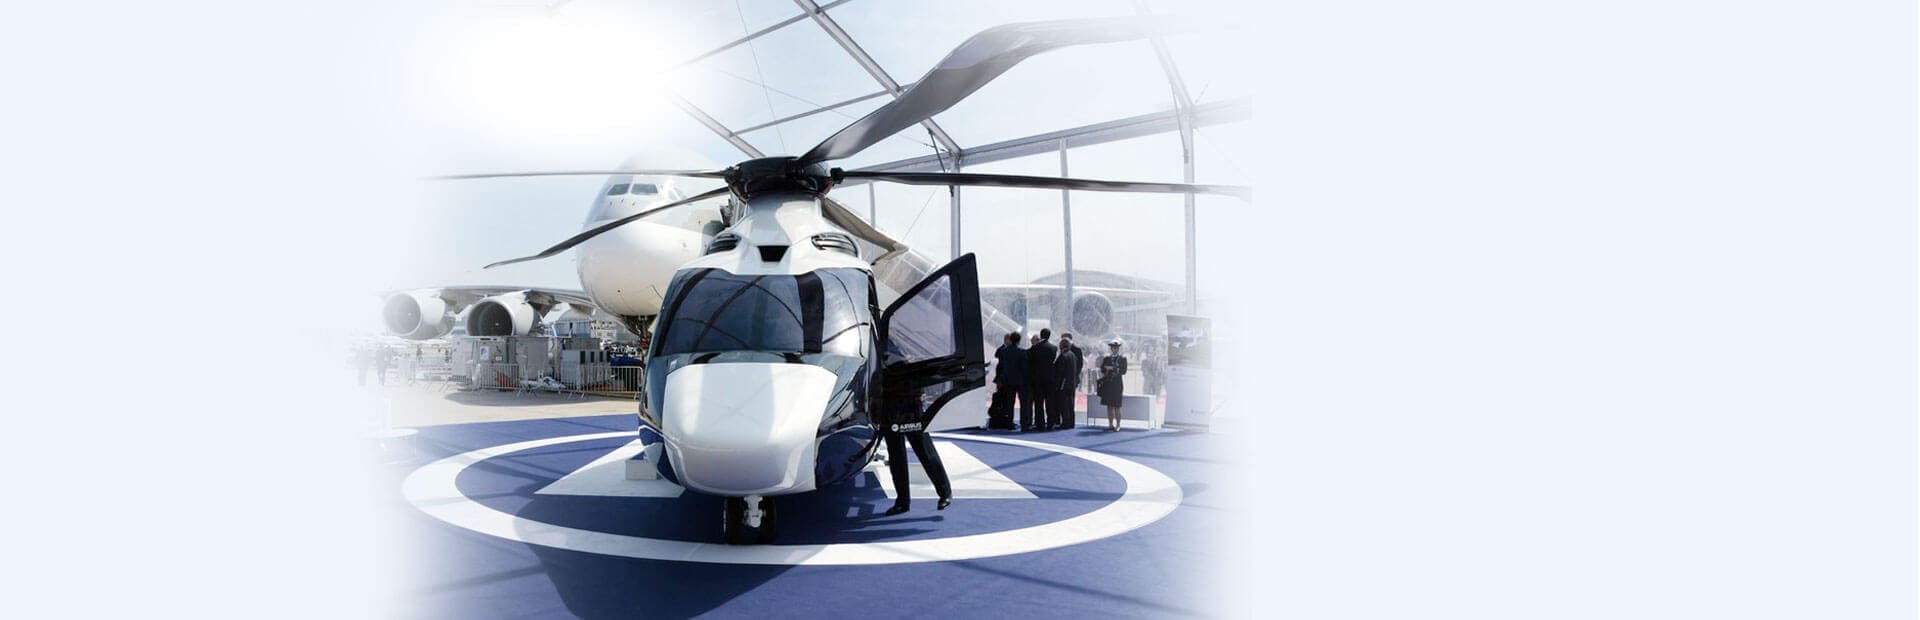 Airbus Helicopters (Eurocopter)